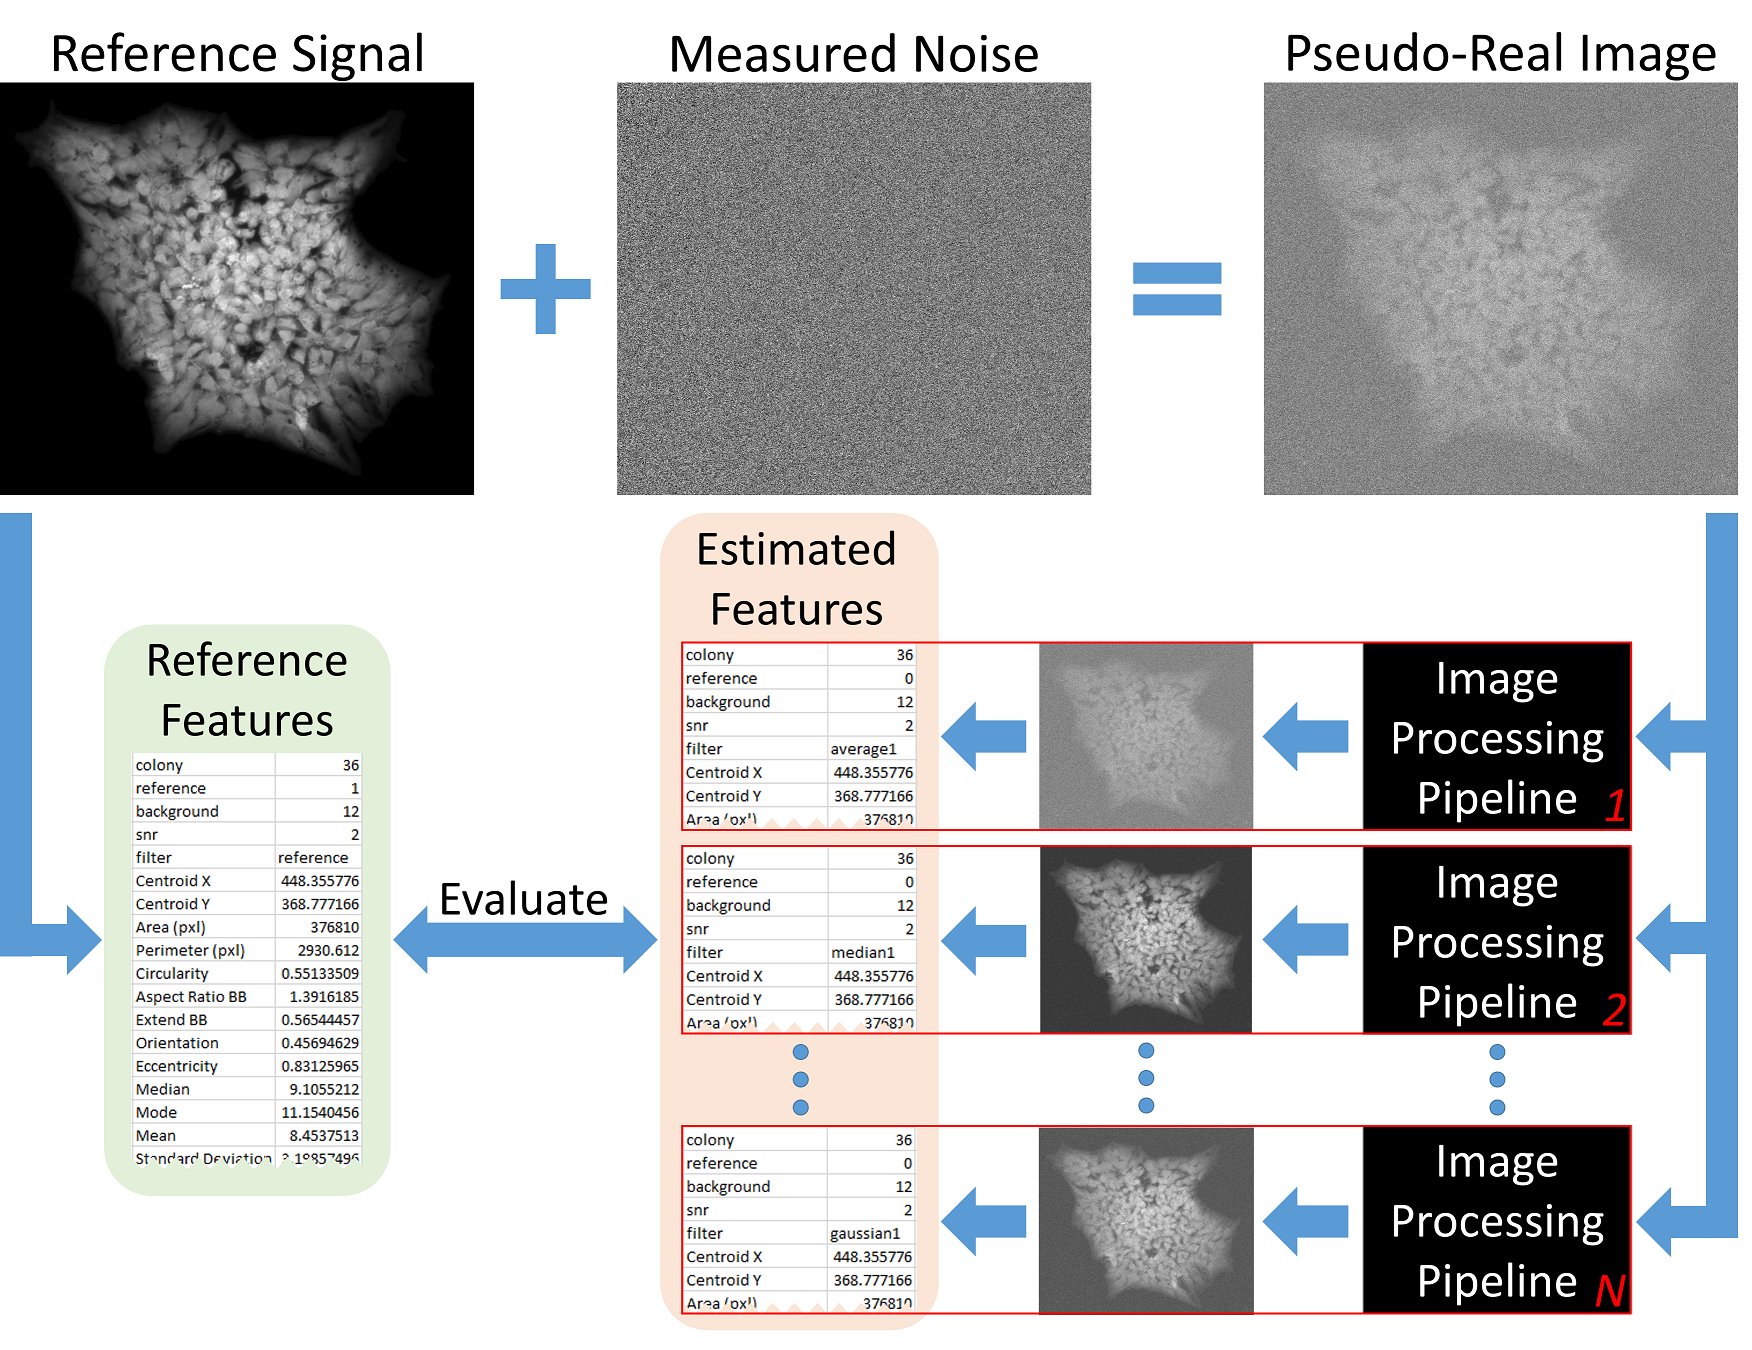 Overview of the methodology for improving the accuracy
of measured image features.